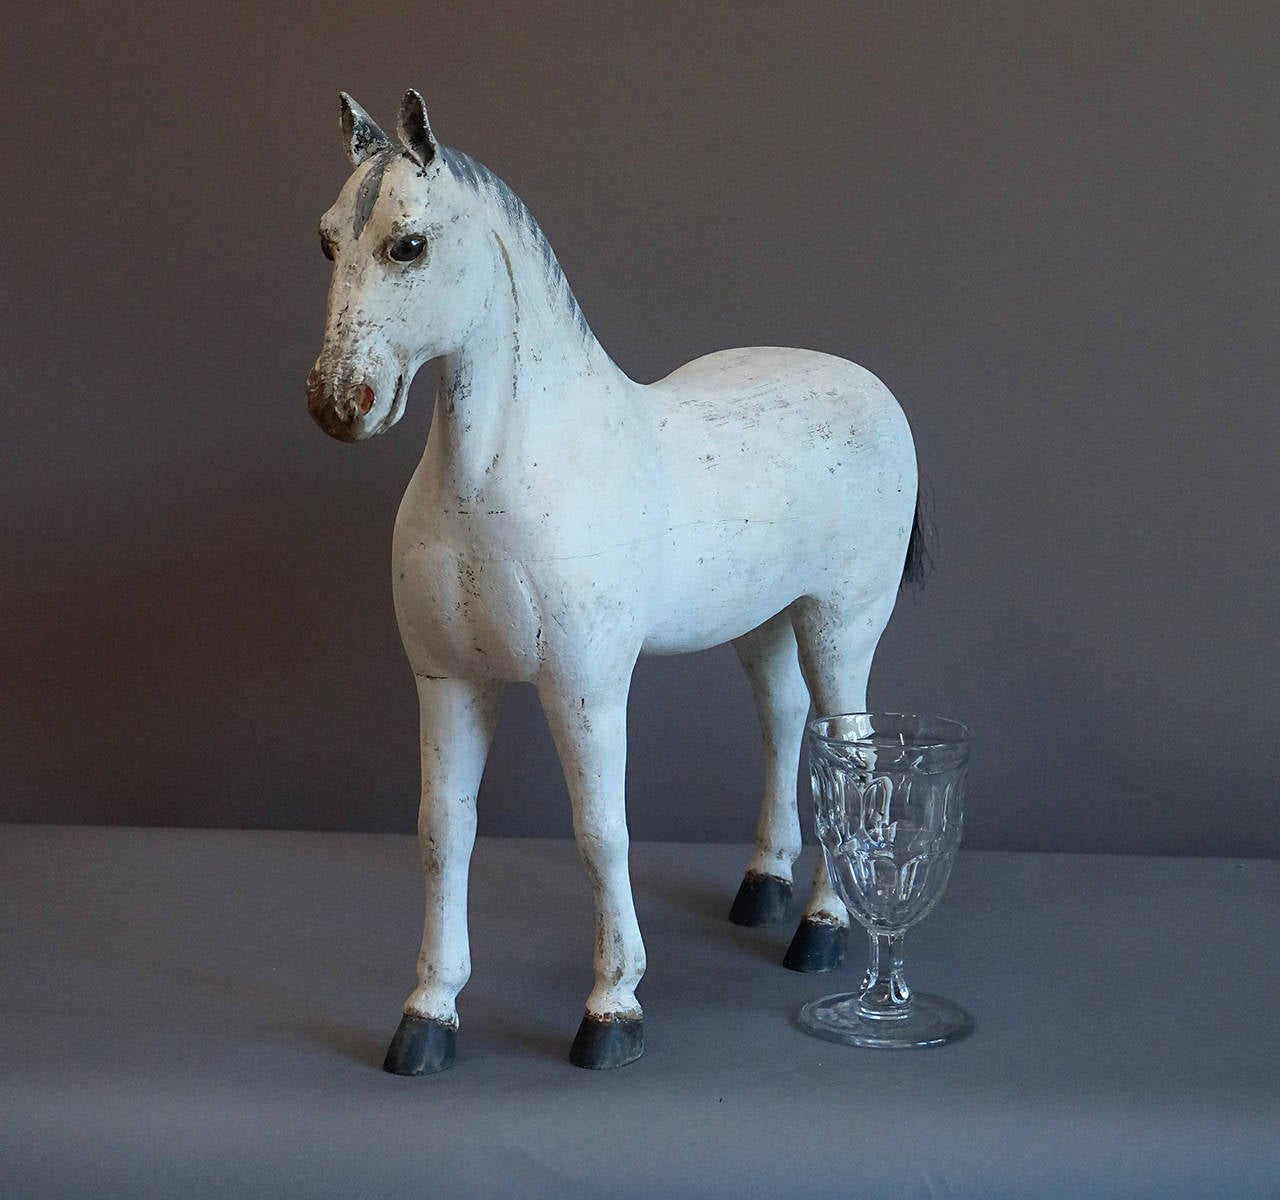 Carved Swedish horse, circa 1910, with docked horsehair tail. The mane is painted and the ears are leather. Glass eyes and original painted surface.